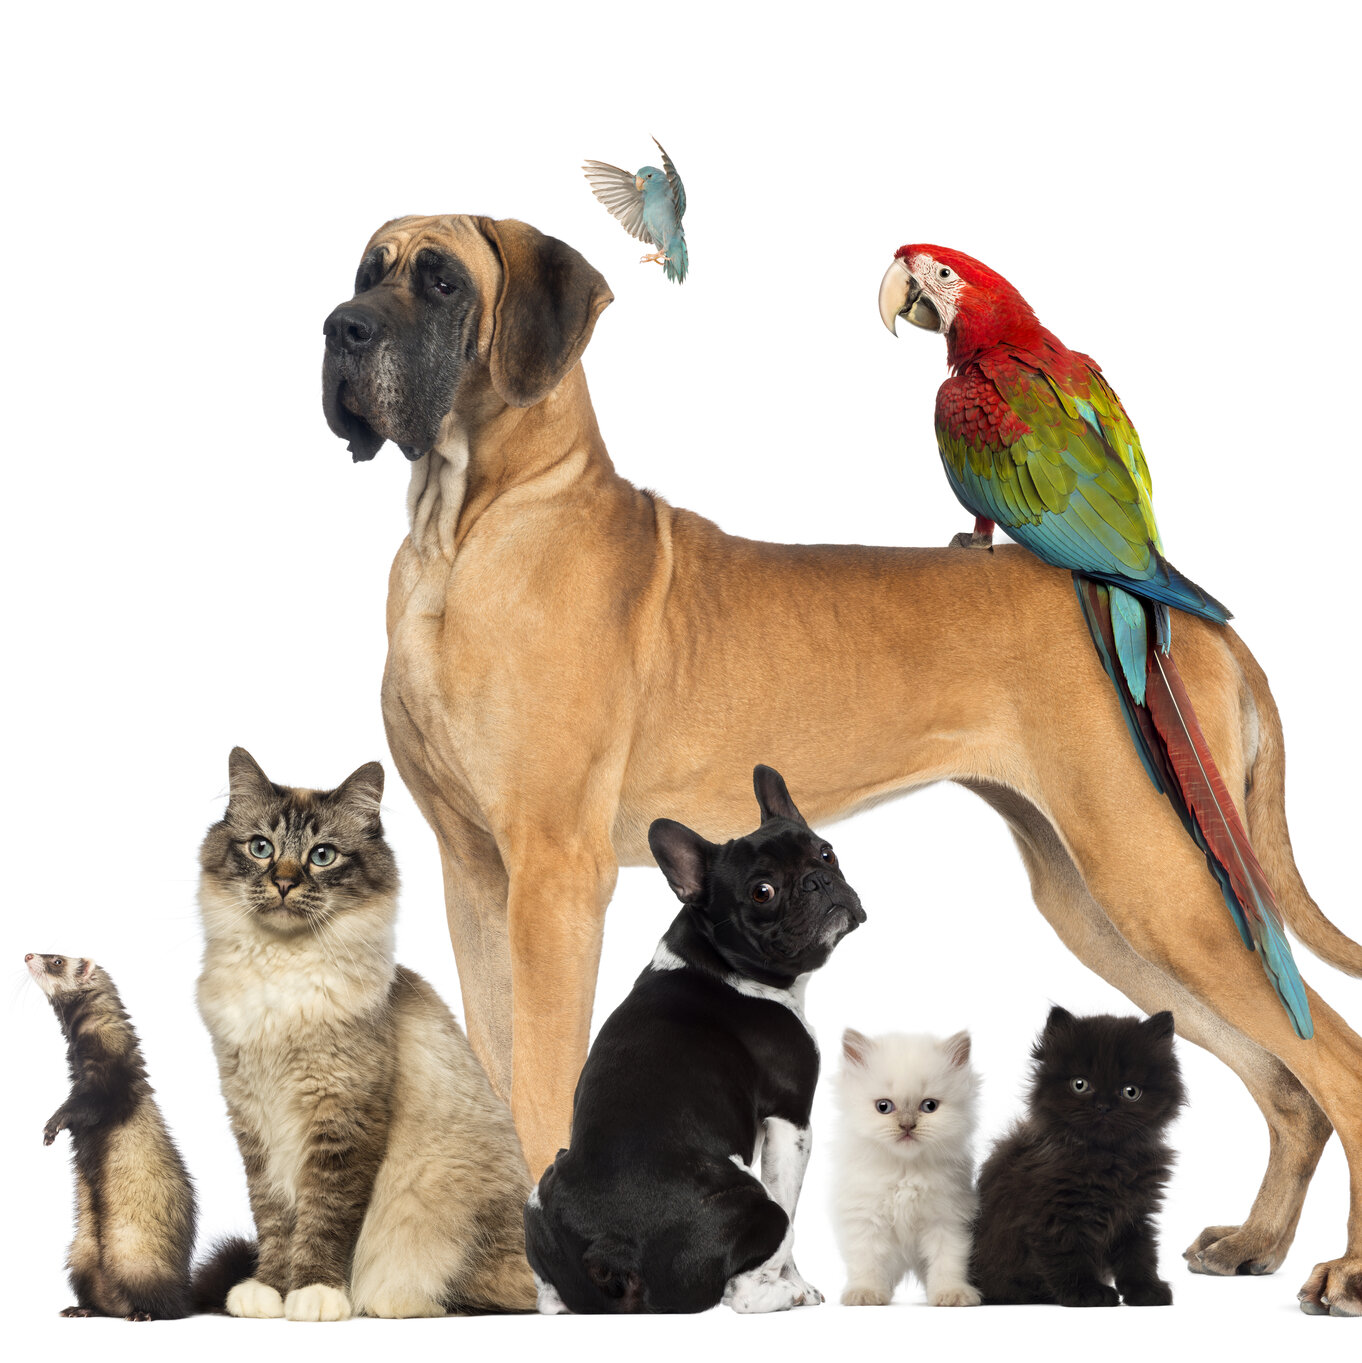 A dog, cat, parrot and other pets